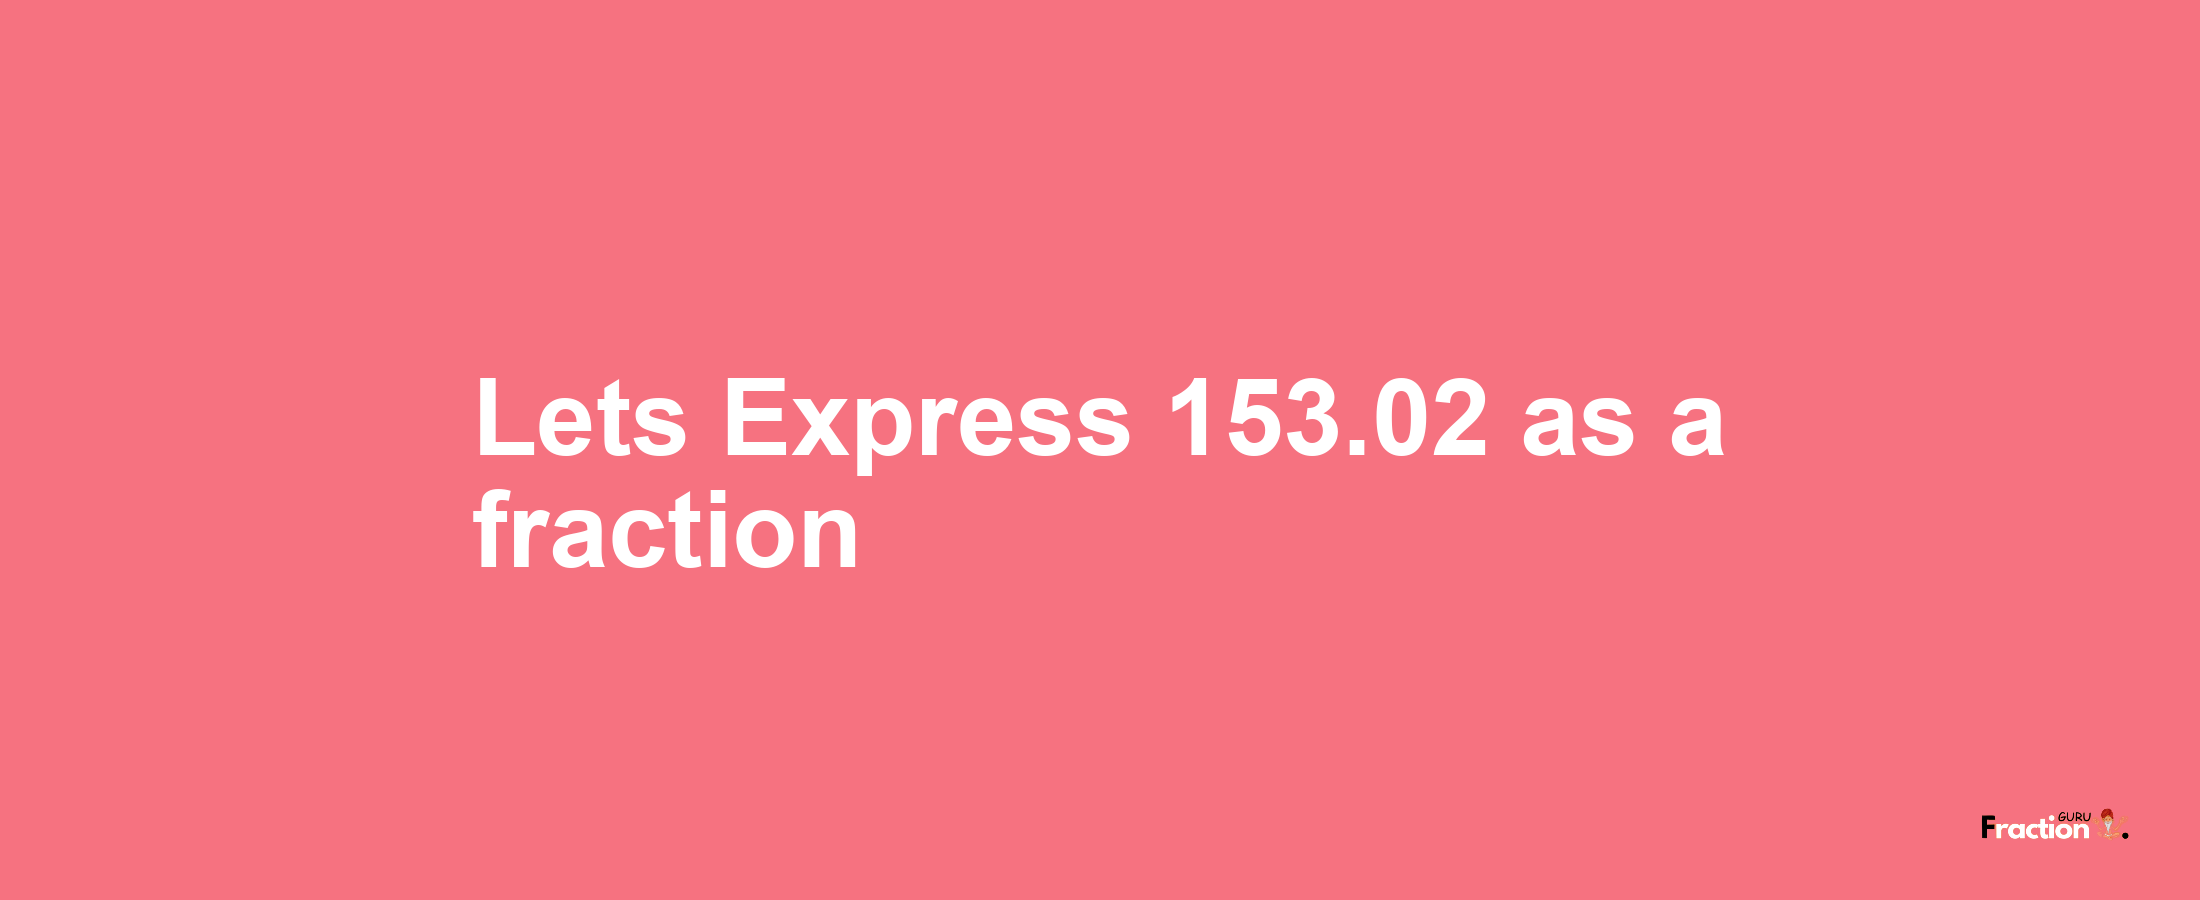 Lets Express 153.02 as afraction